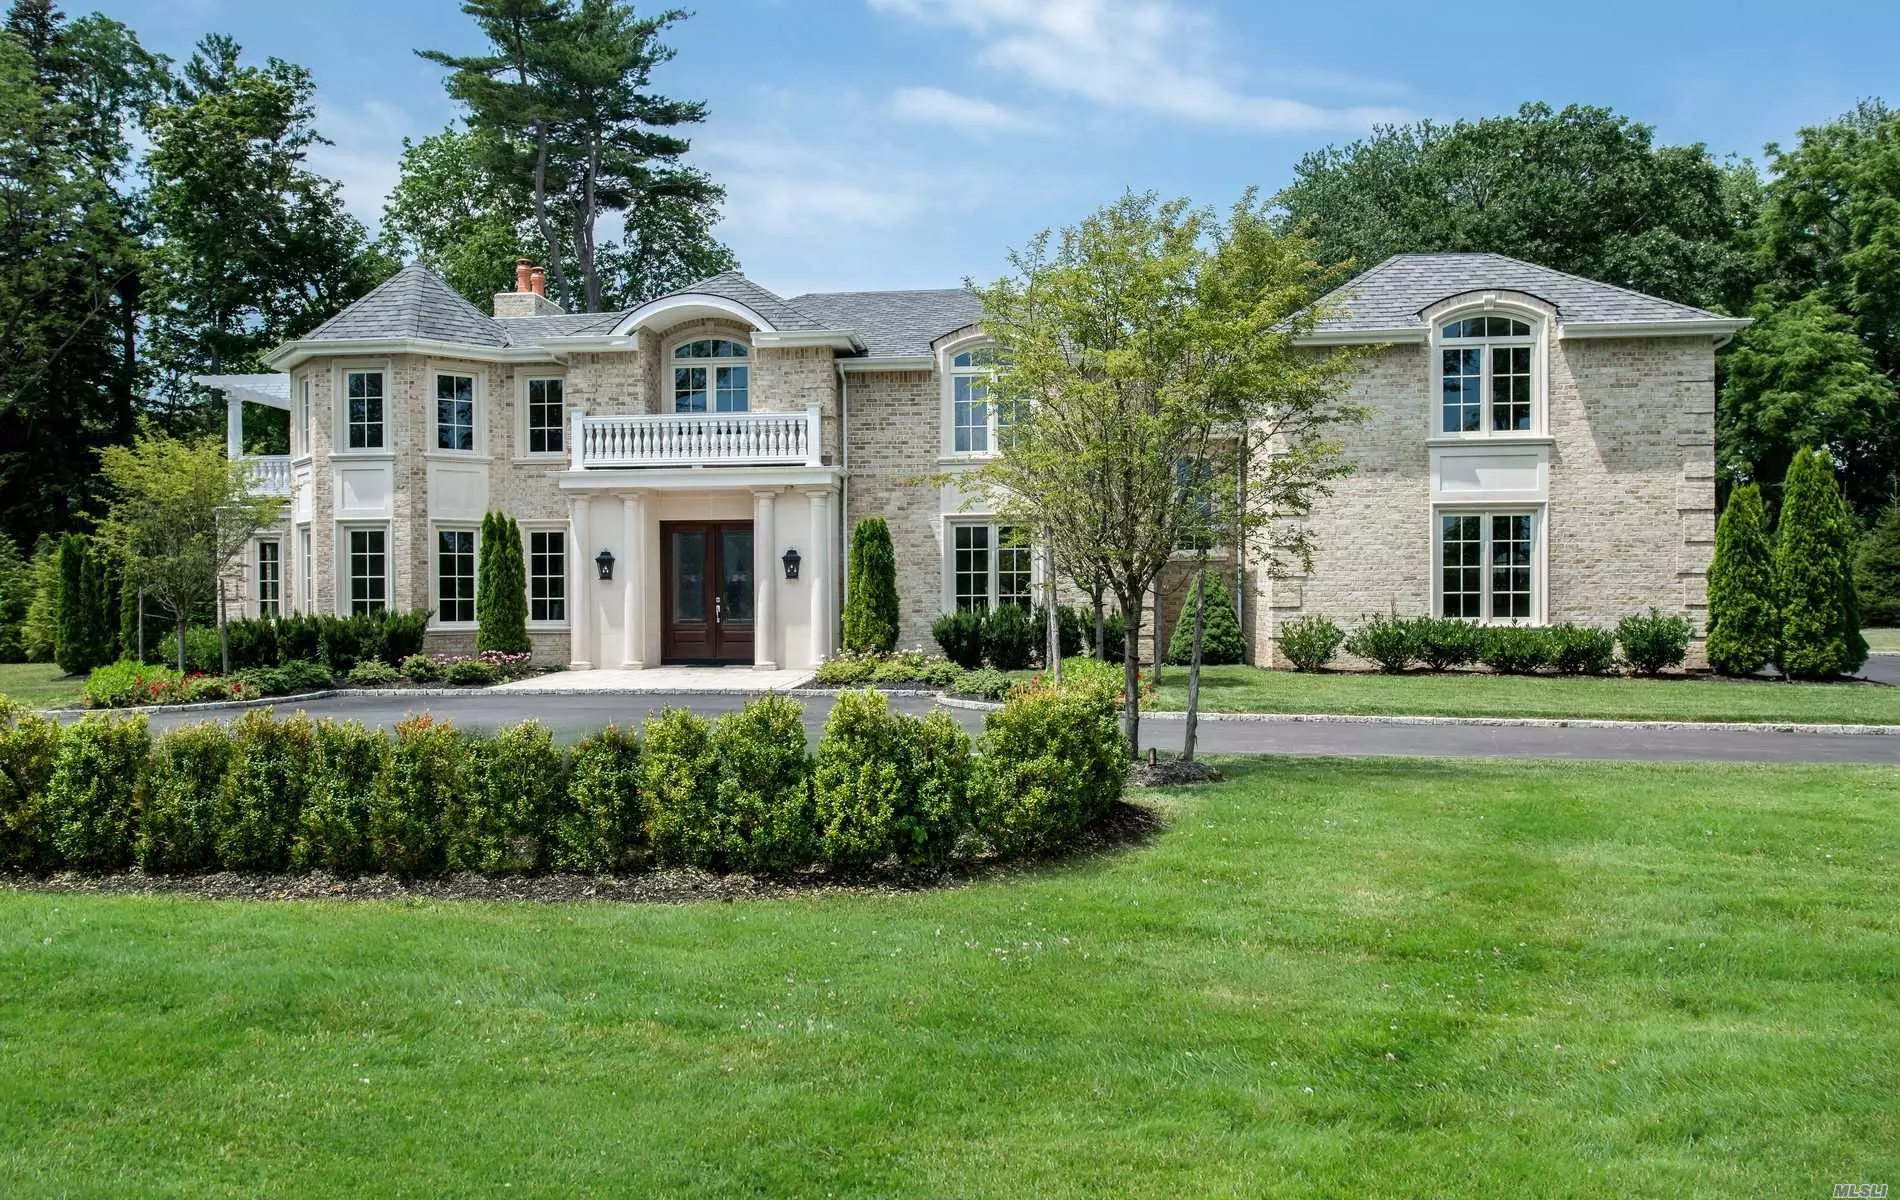 Live The Life Of Luxury In Private, New, Gated Old Westbury Community. Elegant New 6 Bedroom Brick Colonial Set On 2 Acres W Ig Pool Surrounded By Multi-Million Dollar Homes.